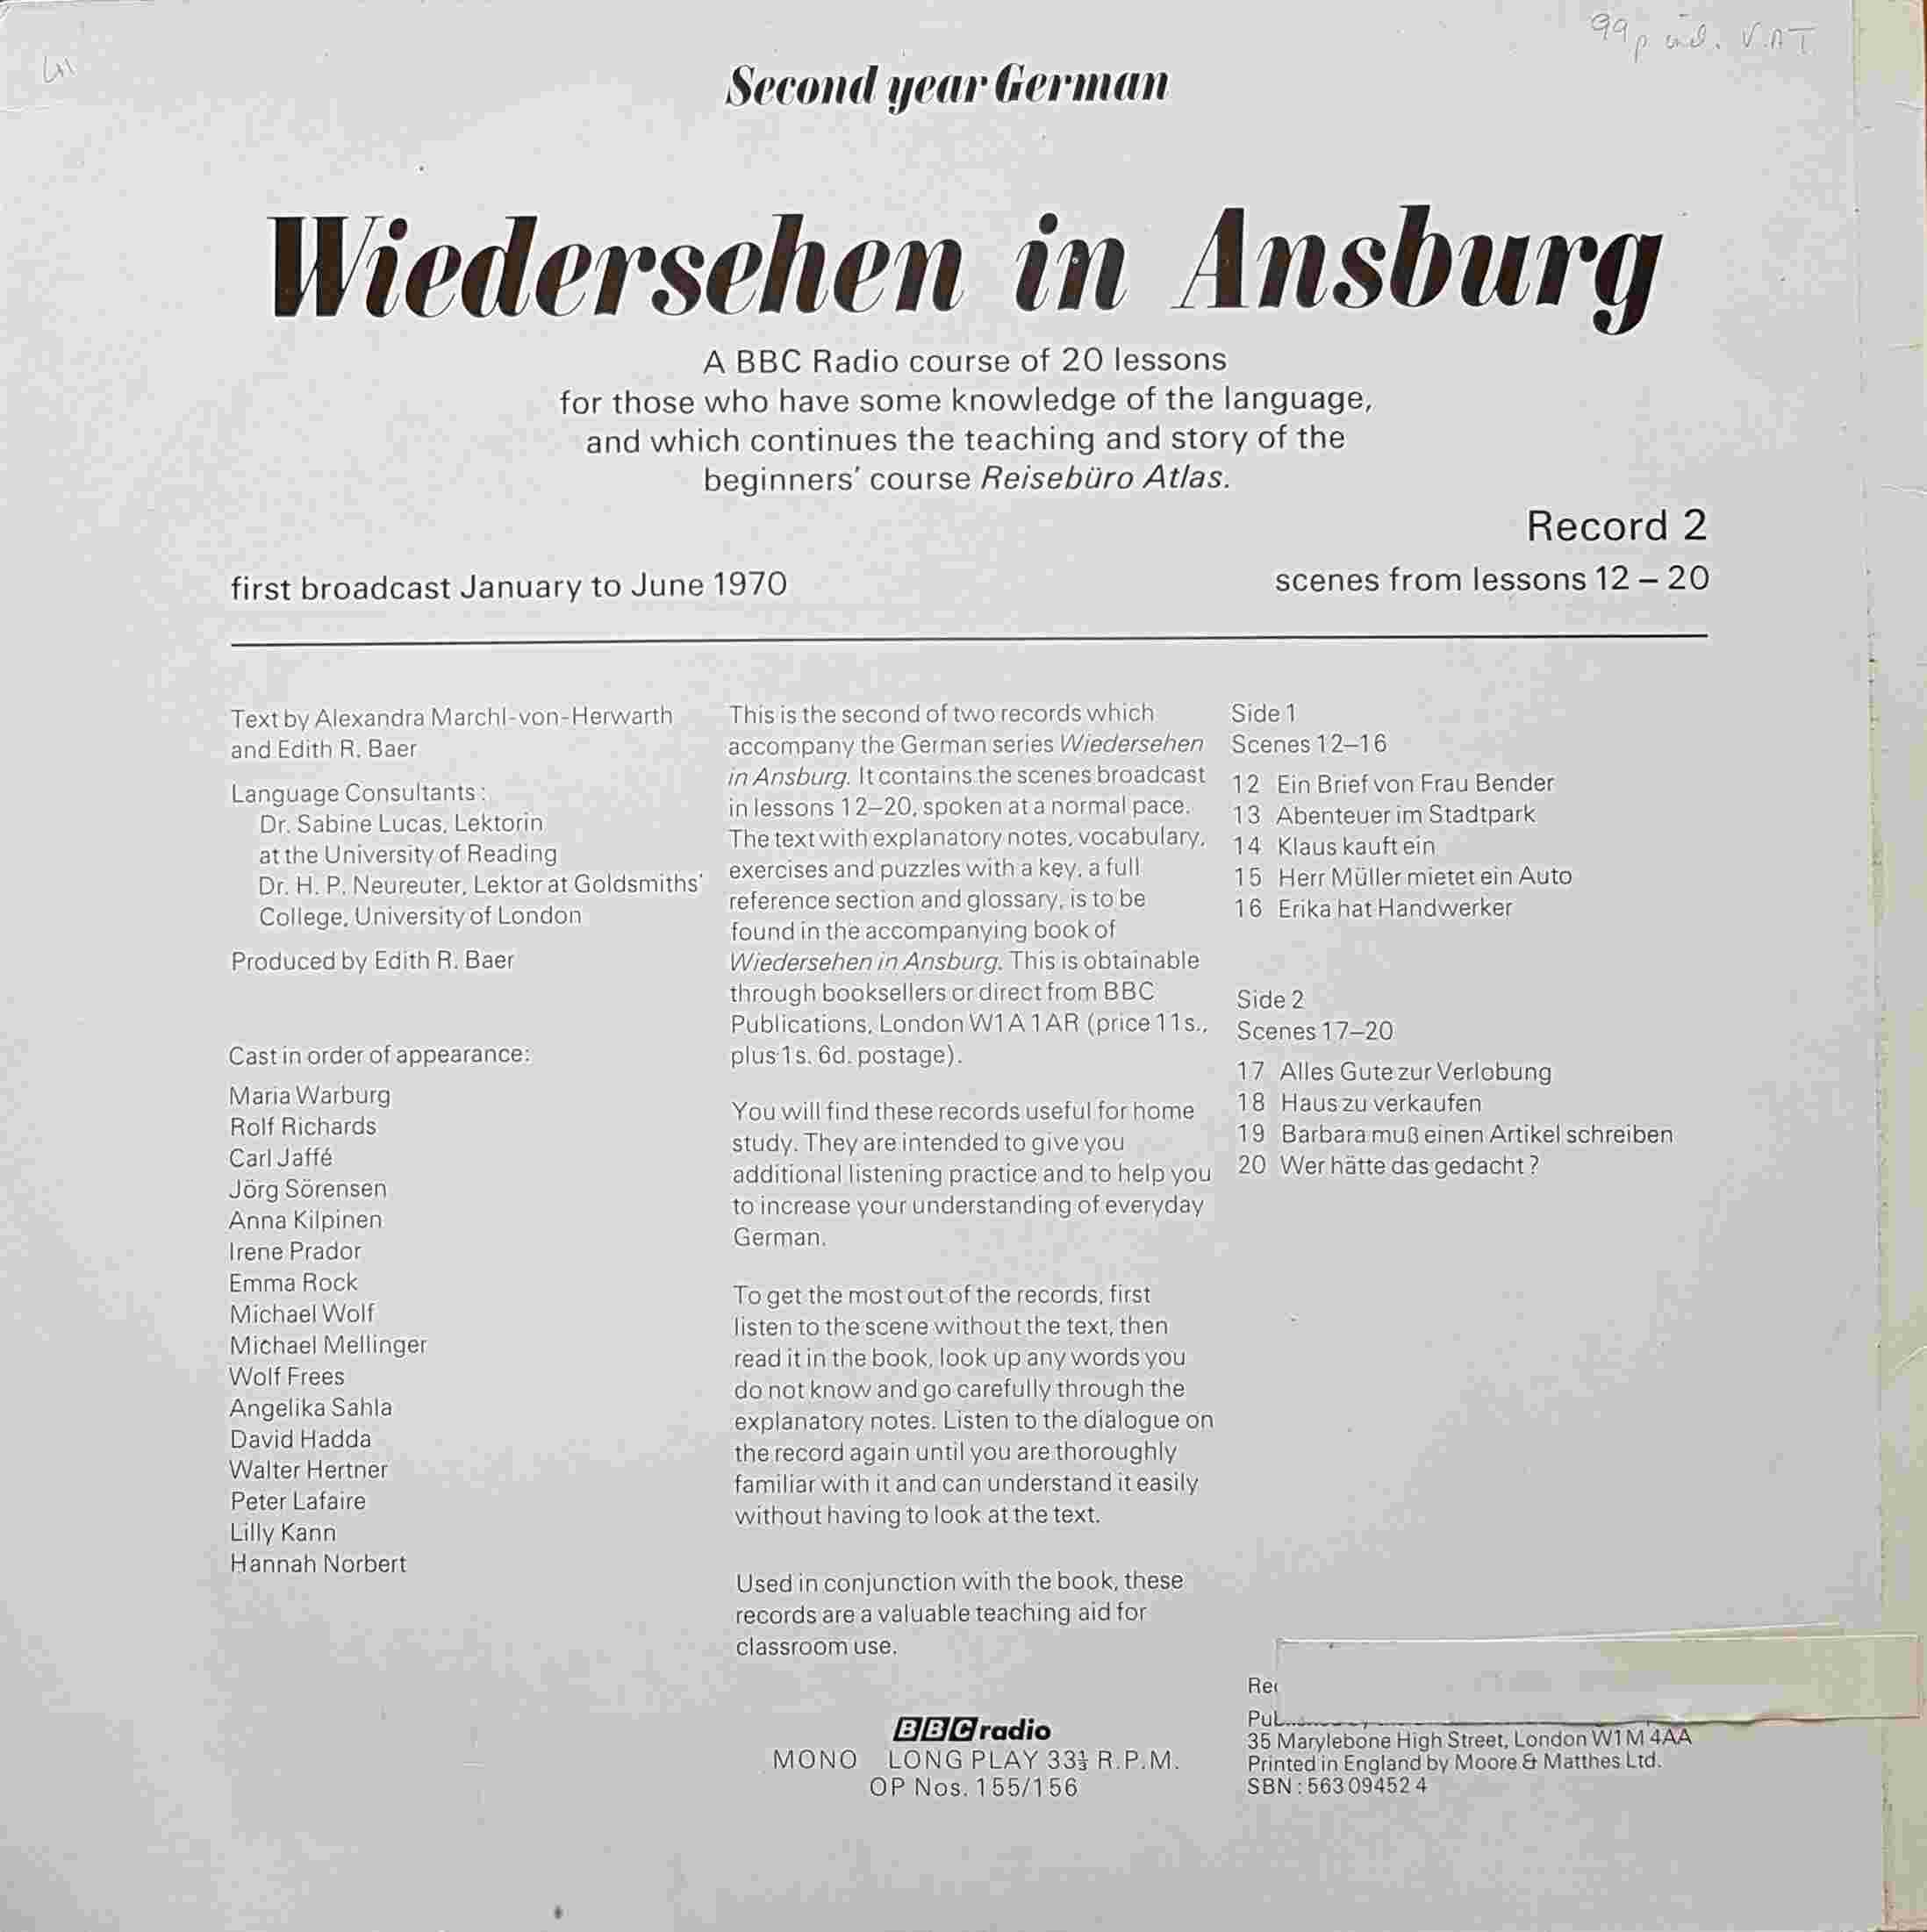 Picture of OP 155/156 Wiedersehen in Ansburg - A BBC radio course for those with some knowledge of German - Record 2 - Lessons 12 - 20 by artist Alexandra Marchl-von-Herwarth / Edith R. Baer from the BBC records and Tapes library